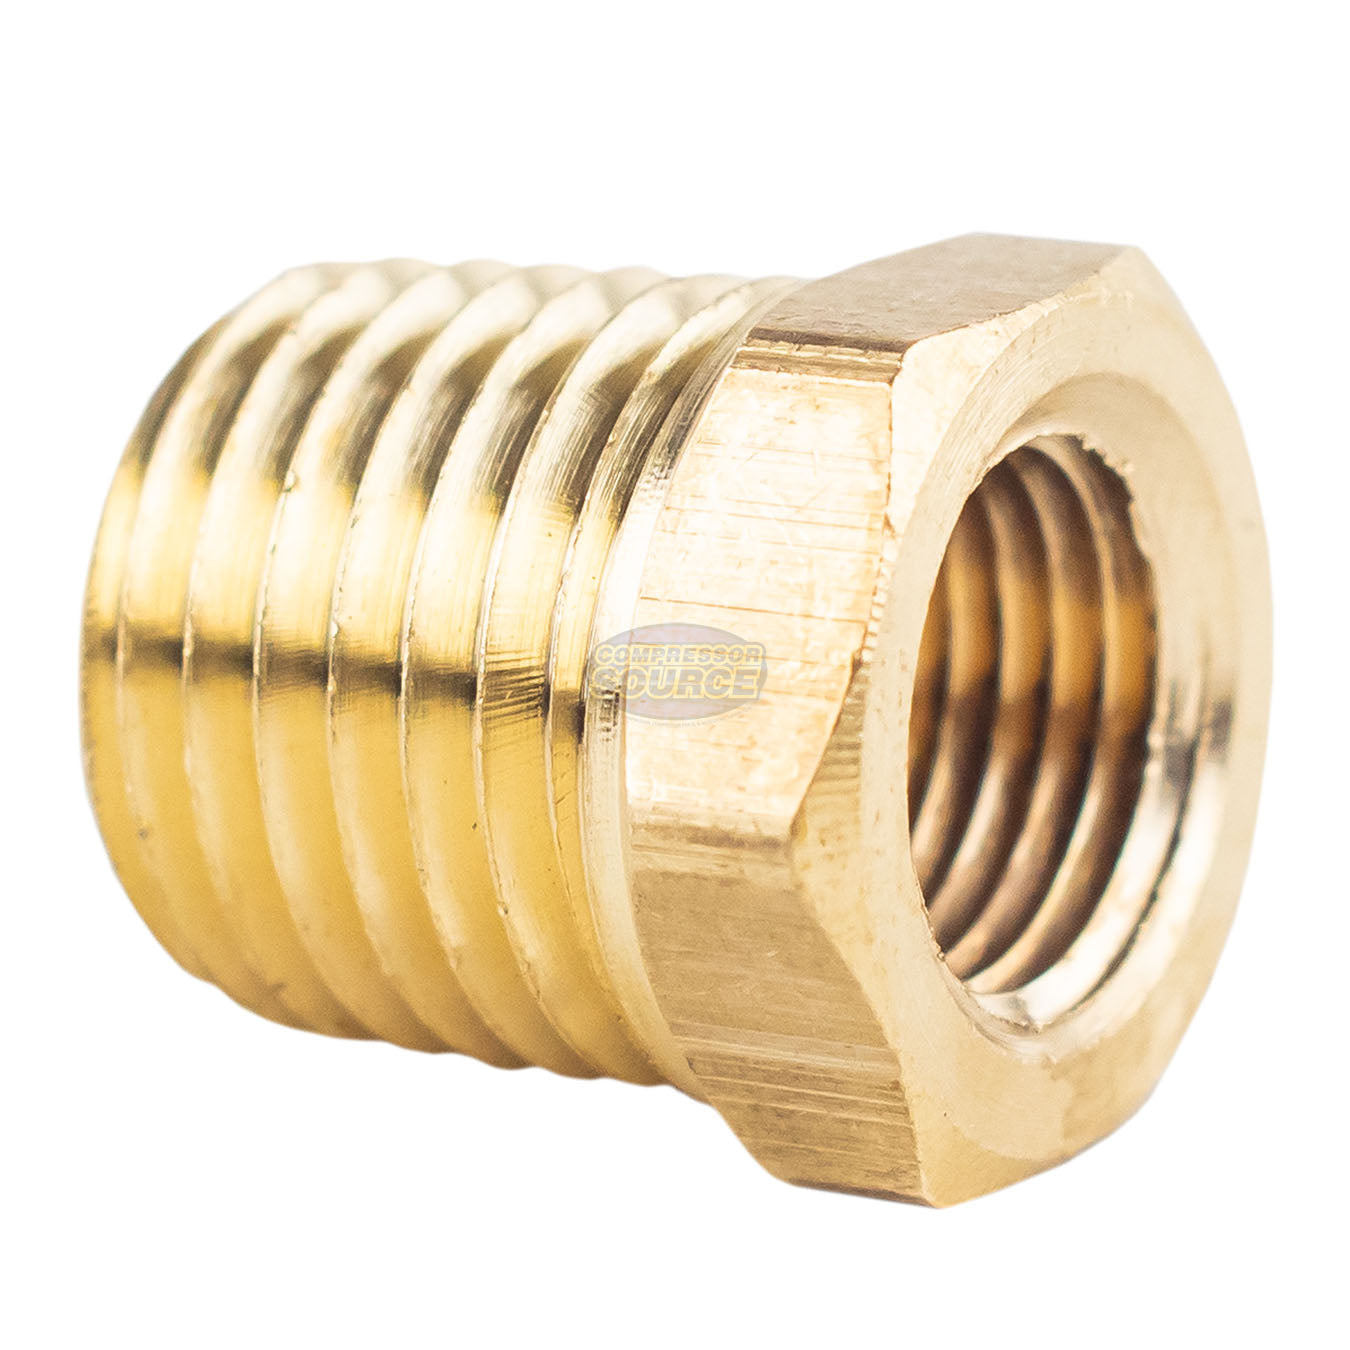 1/4" Male x 1/8" Female NPT Hex Bushing Adapter Pipe Reducer Brass Fitting 110C